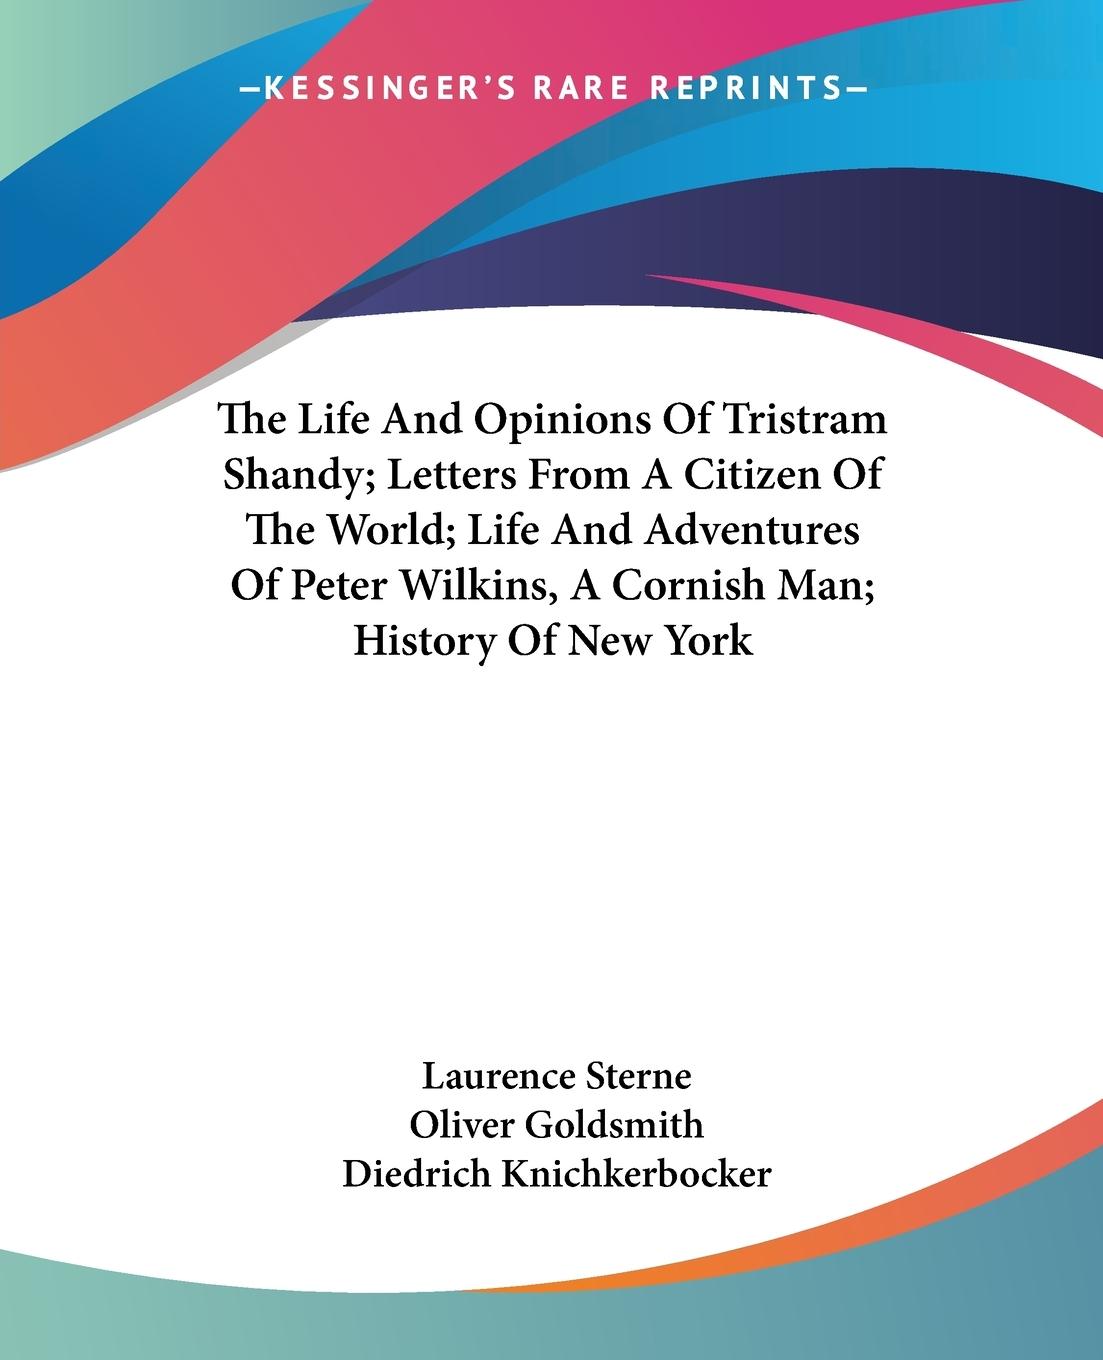 The Life And Opinions Of Tristram Shandy; Letters From A Citizen Of The World; Life And Adventures Of Peter Wilkins, A Cornish Man; History Of New York - Sterne, Laurence Goldsmith, Oliver Knichkerbocker, Diedrich